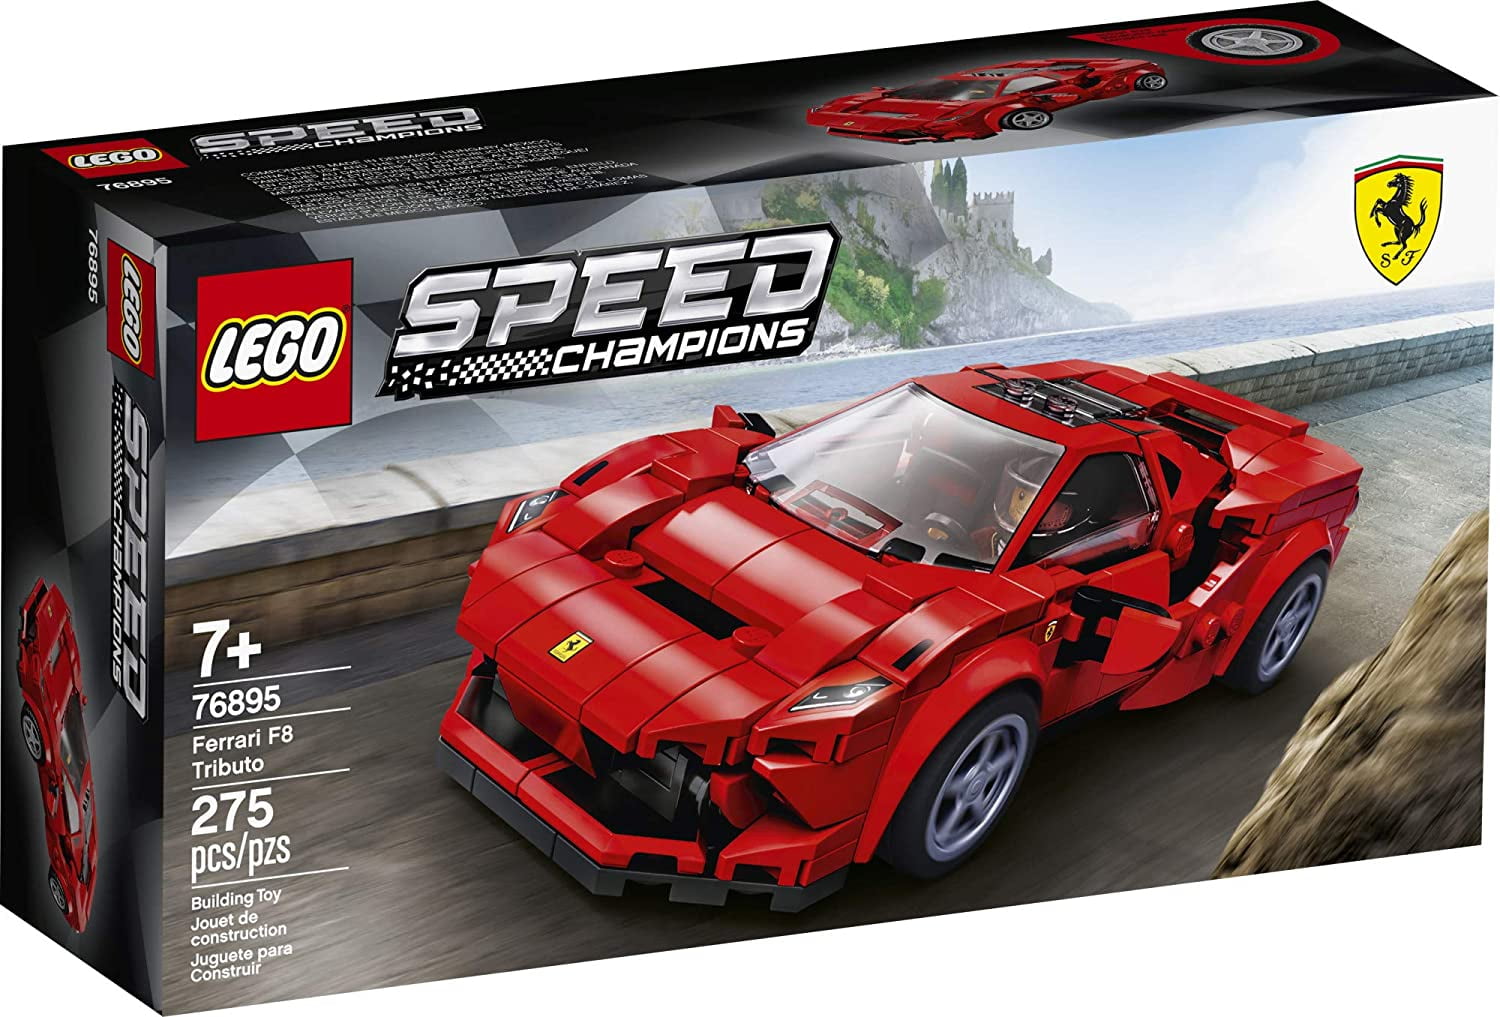 LEGO Speed Champions Ferrari F8 Tributo Toy Cars for Kids, Featuring Minifigure, New 2020 (275 Pieces) - Walmart.com